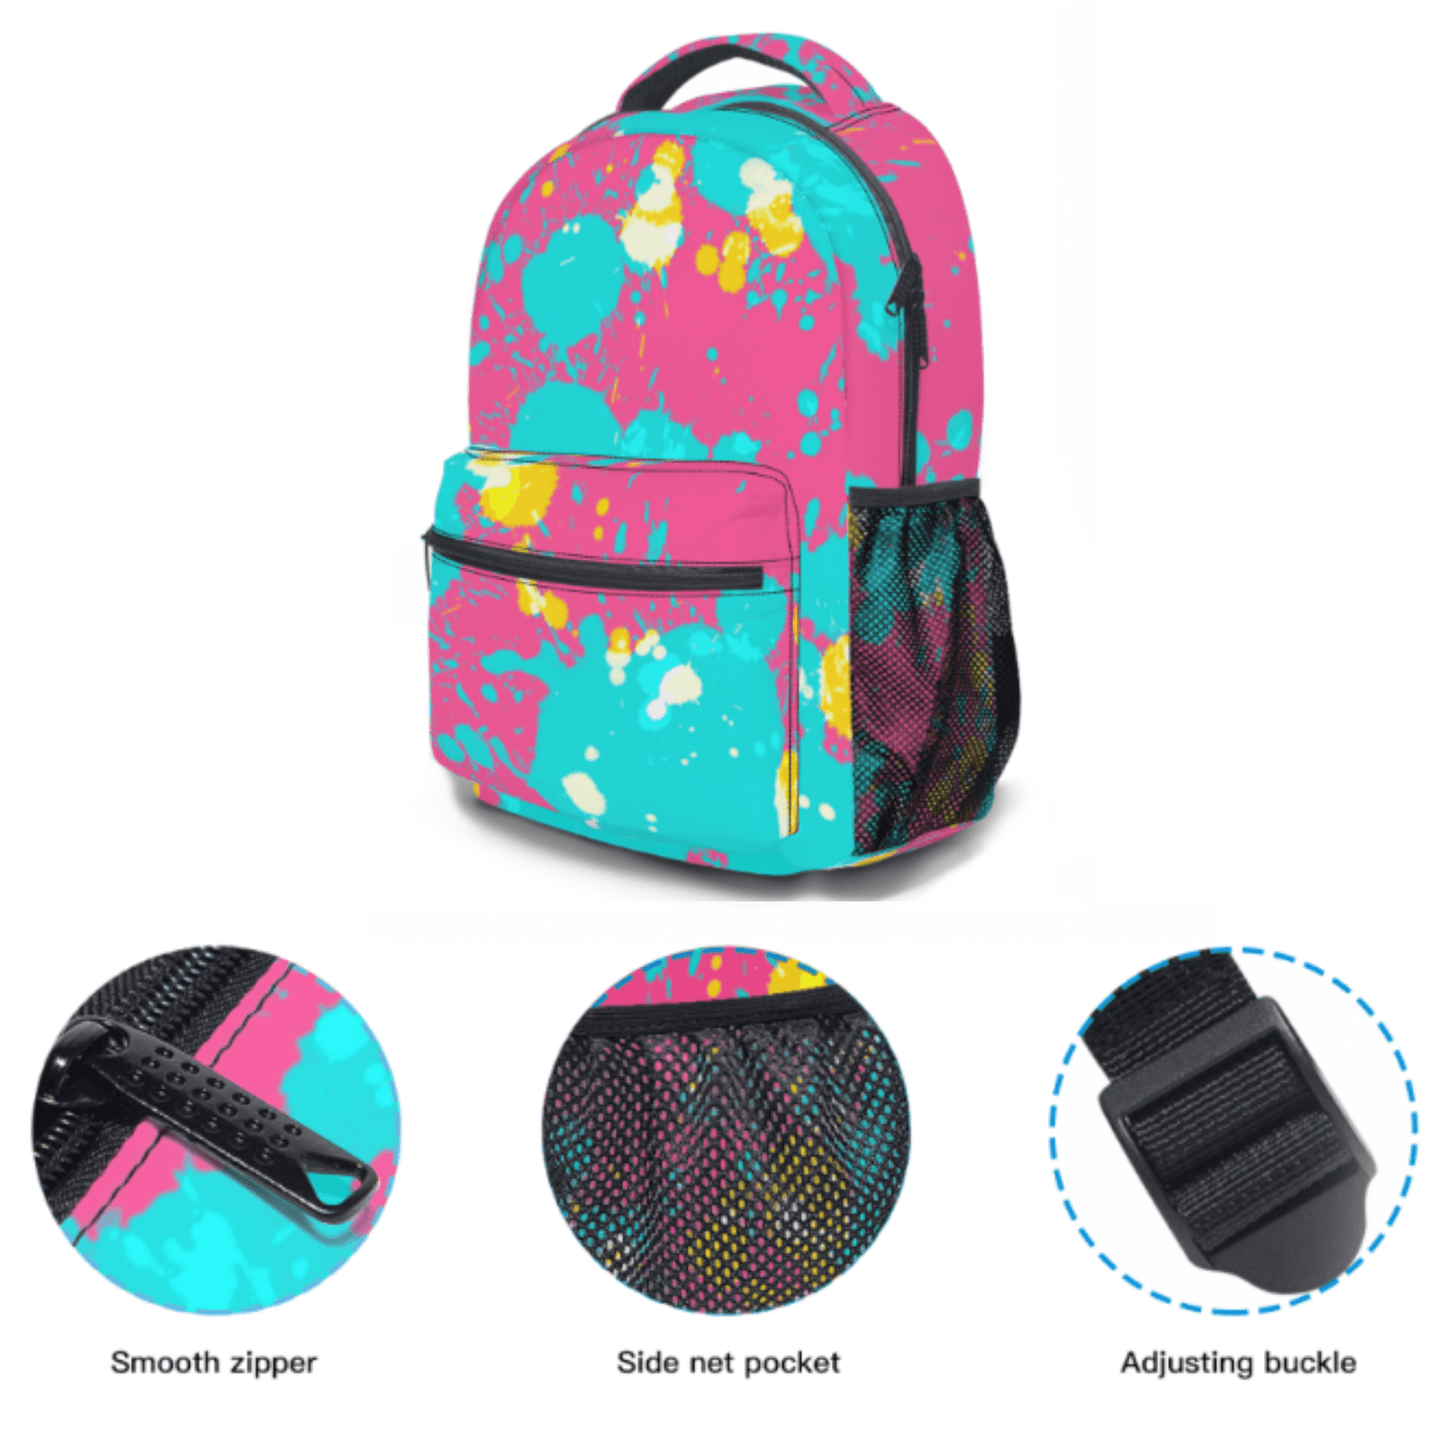 The perfect carry on bag for kids personal items shows a smooth zipper and adjusting buckle.